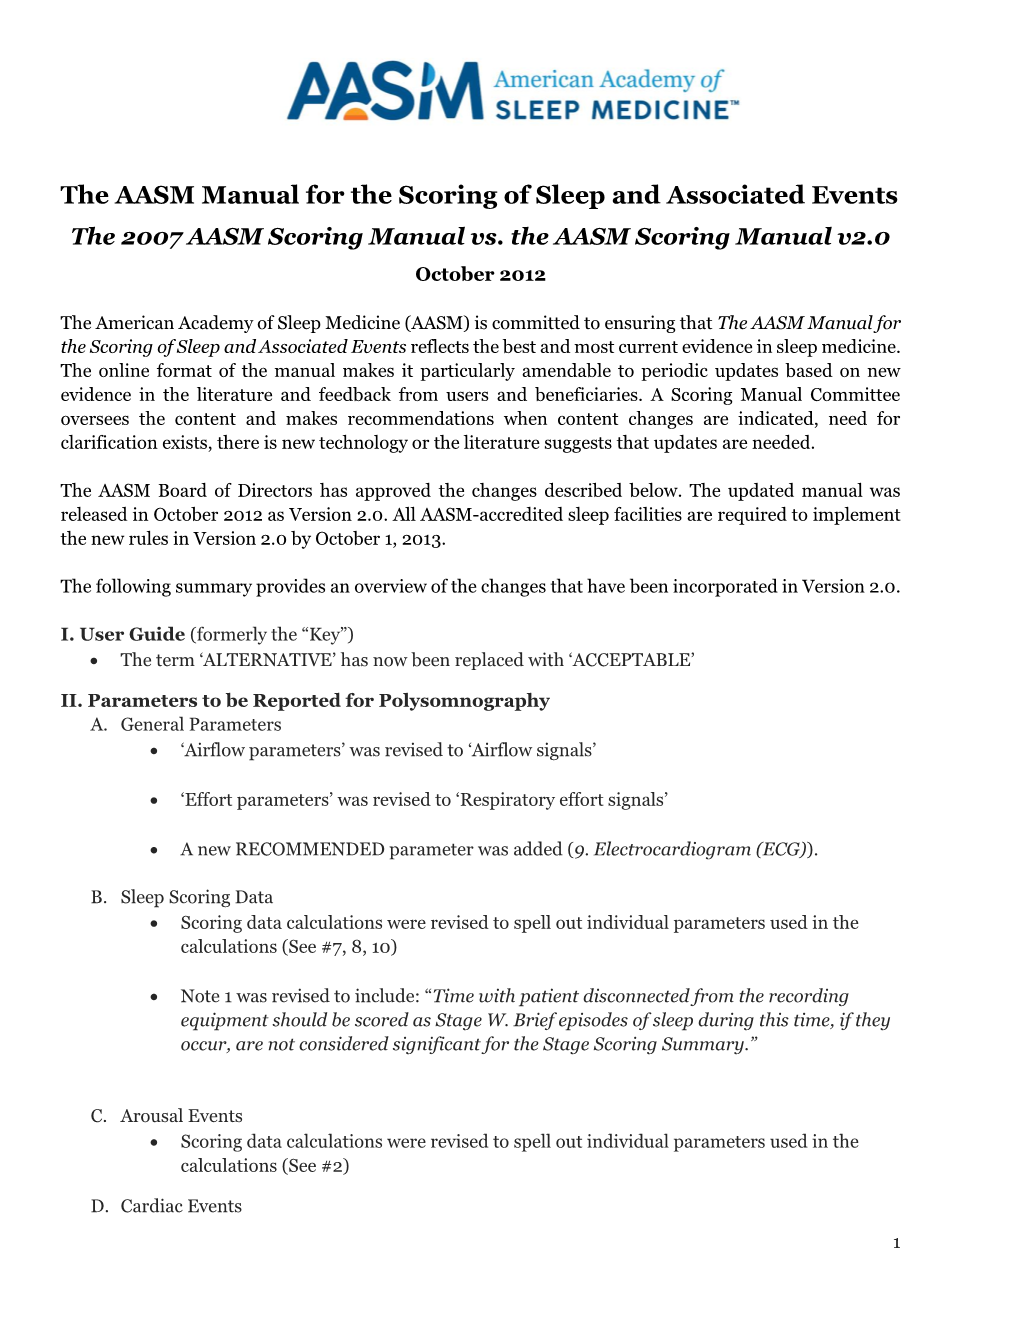 The AASM Manual for the Scoring of Sleep and Associated Events the 2007 AASM Scoring Manual Vs